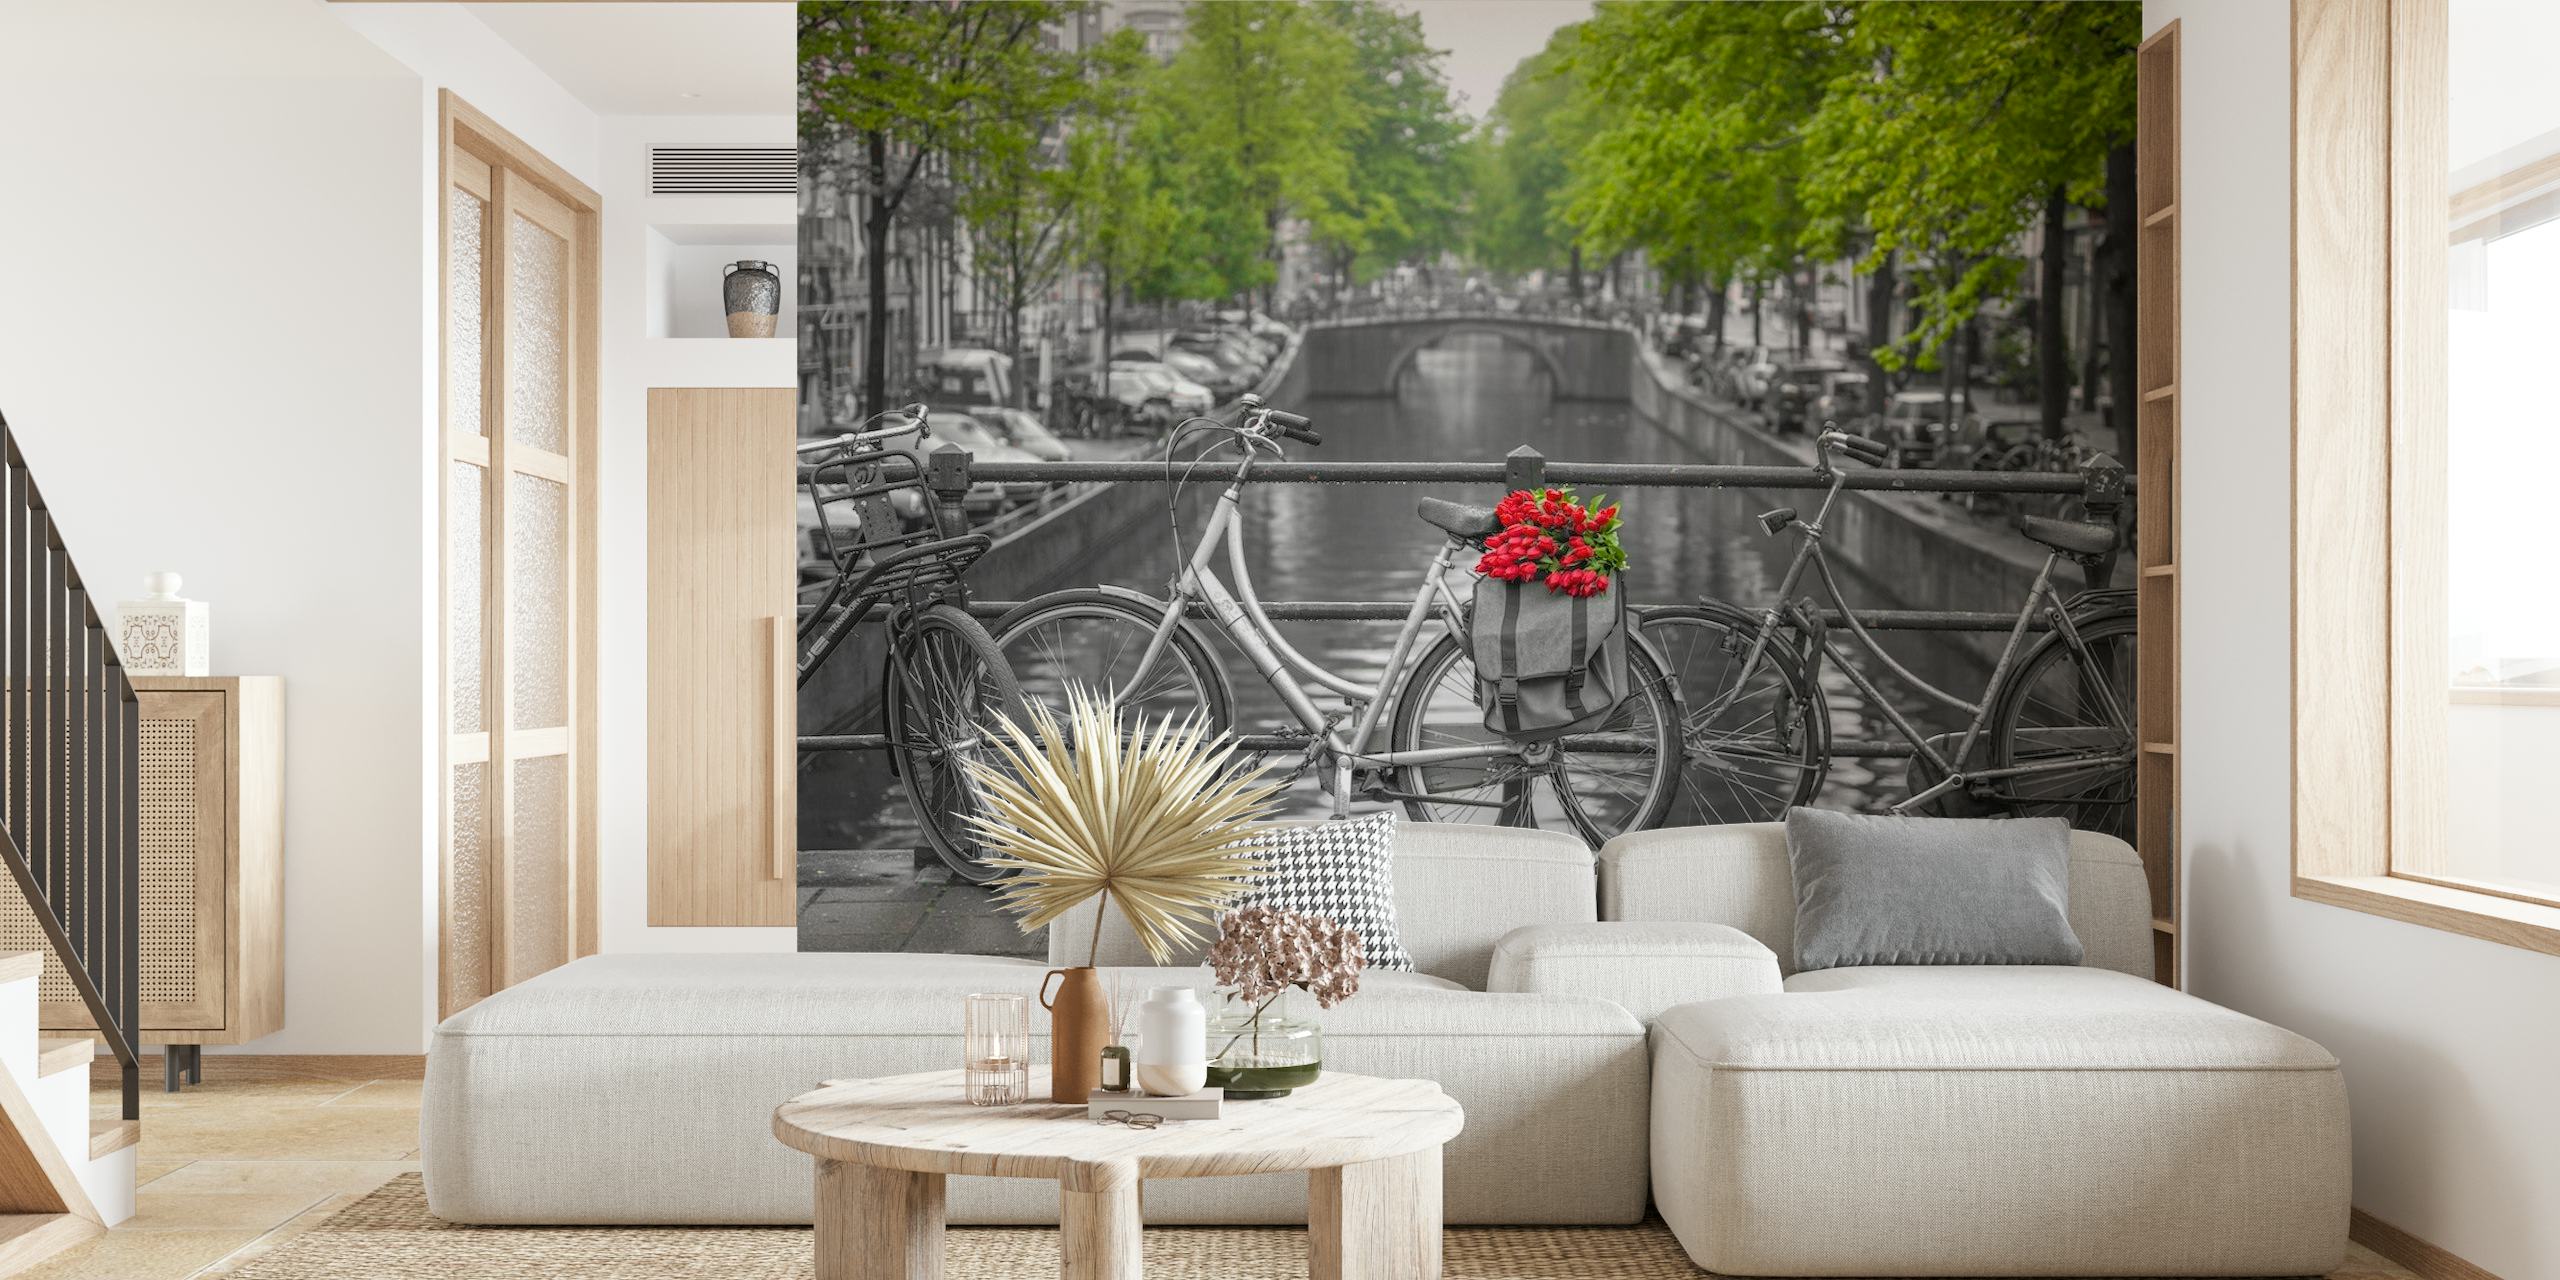 Amsterdam canal with bicycles and pop of red flowers wall mural